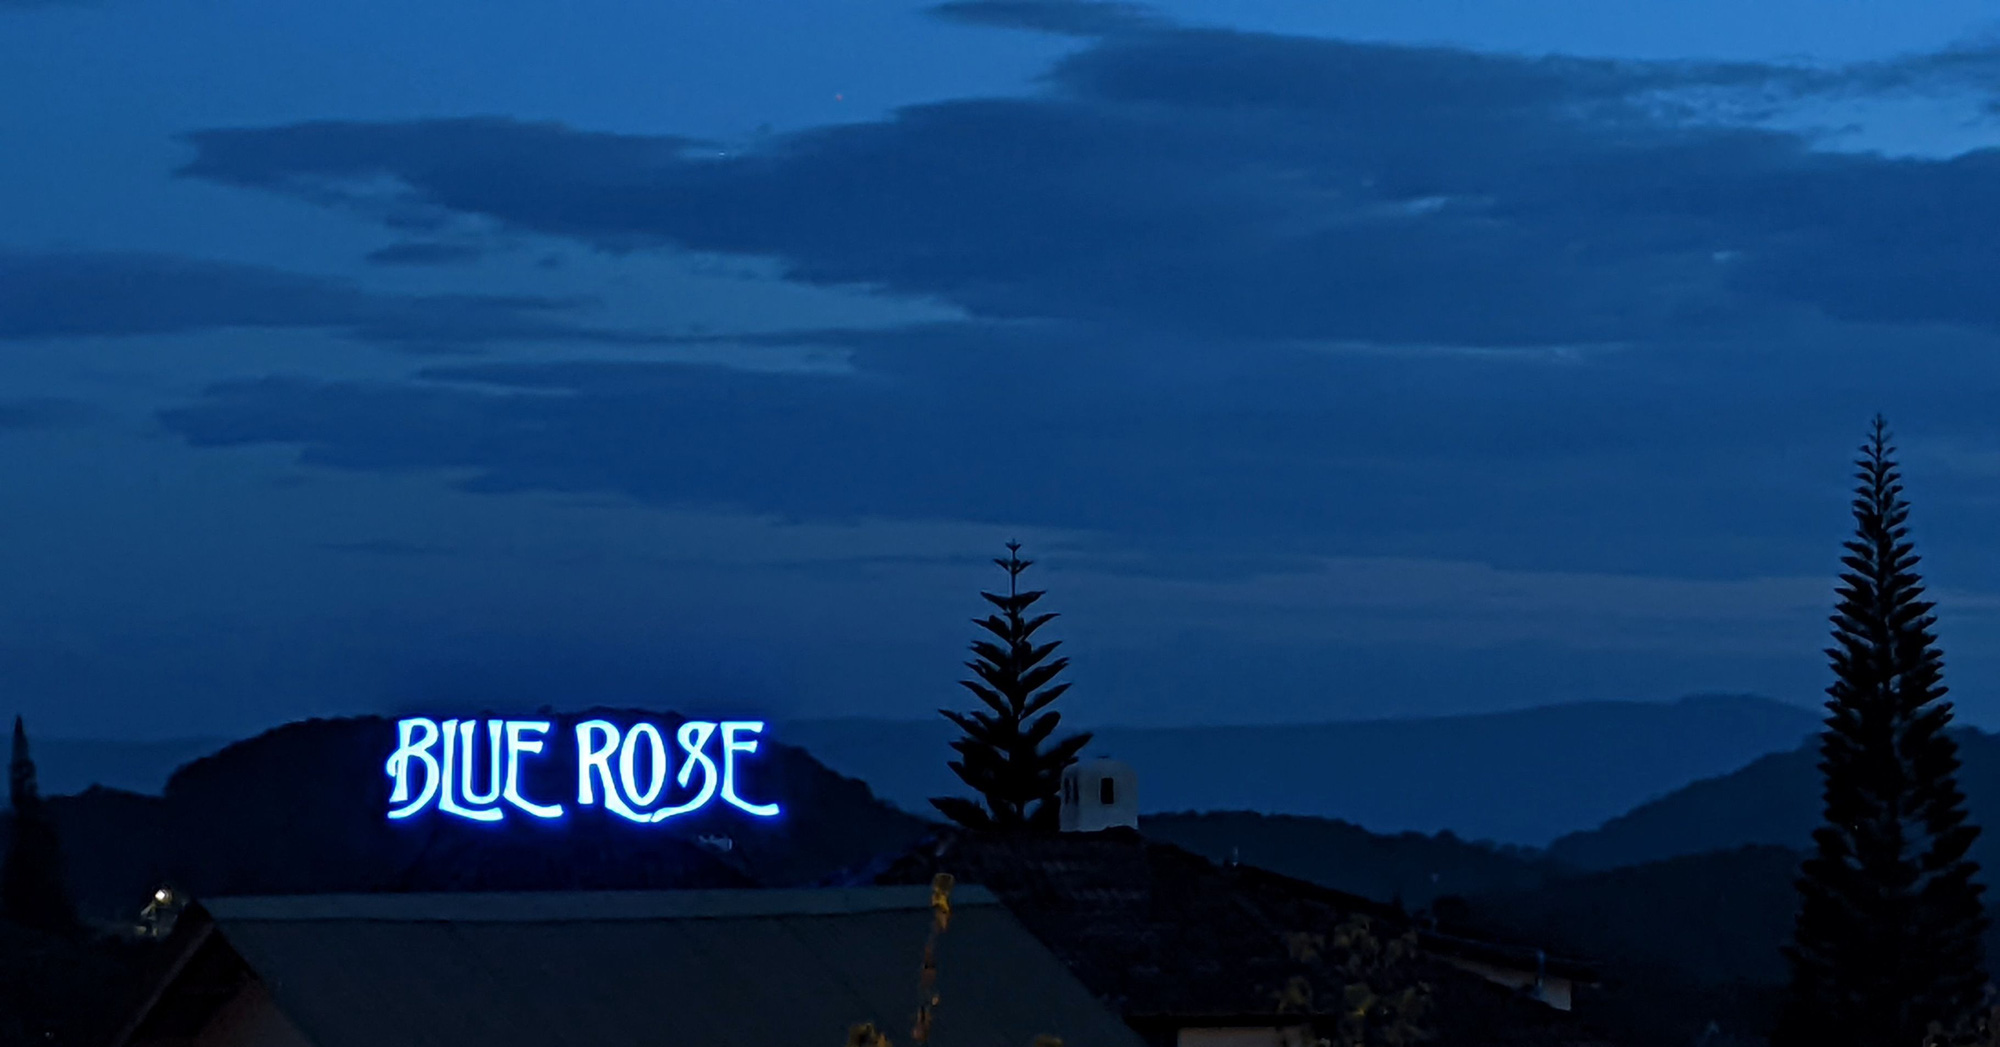 Blue Rose, a blue rose that brings silence in a dreamland